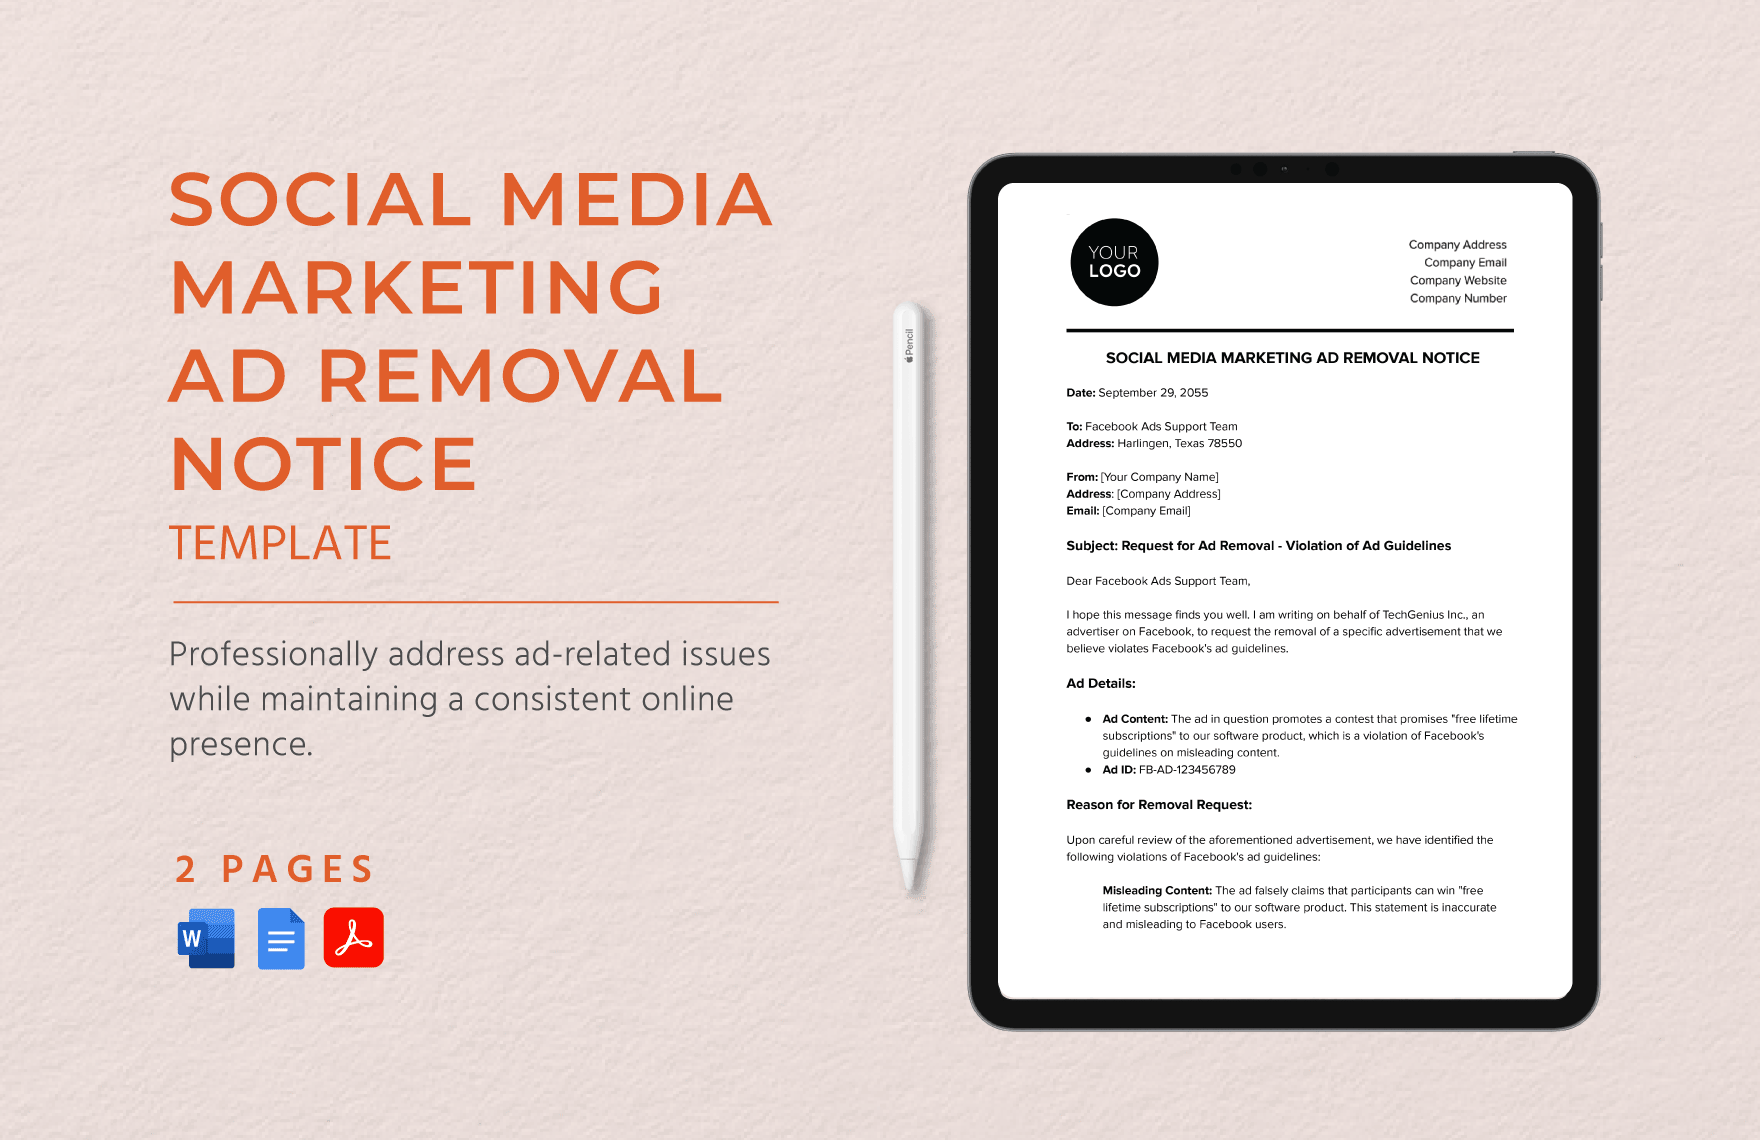 Social Media Marketing Ad Removal Notice Template in Word, Google Docs, PDF